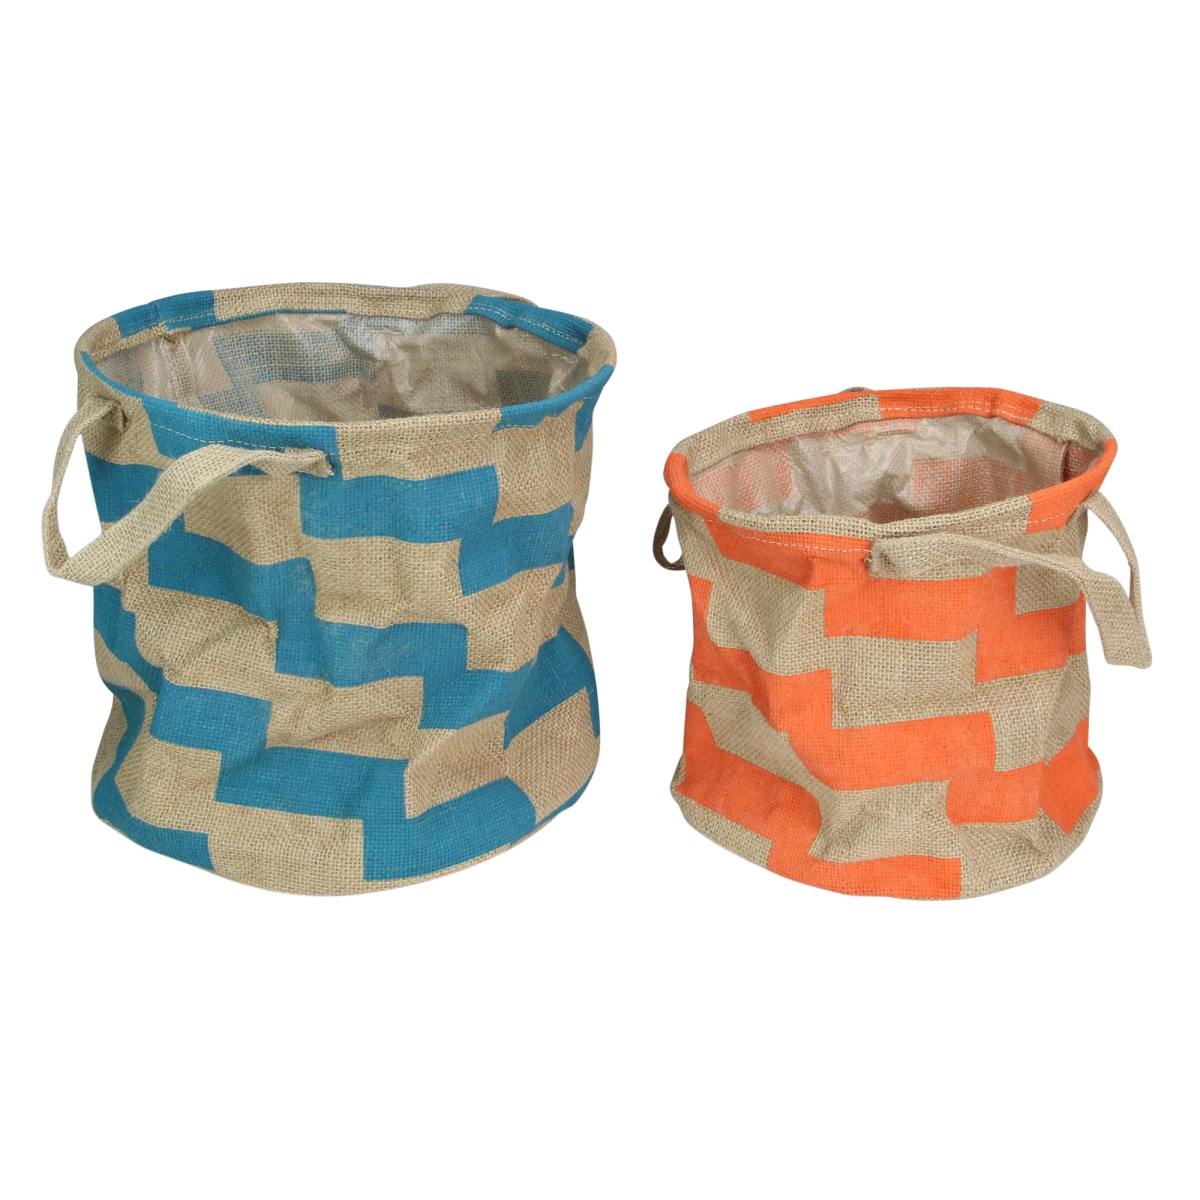 Picture of Avon 33537530 12 in. Burlap Baskets with Handles - Orange & Teal - Set of 2